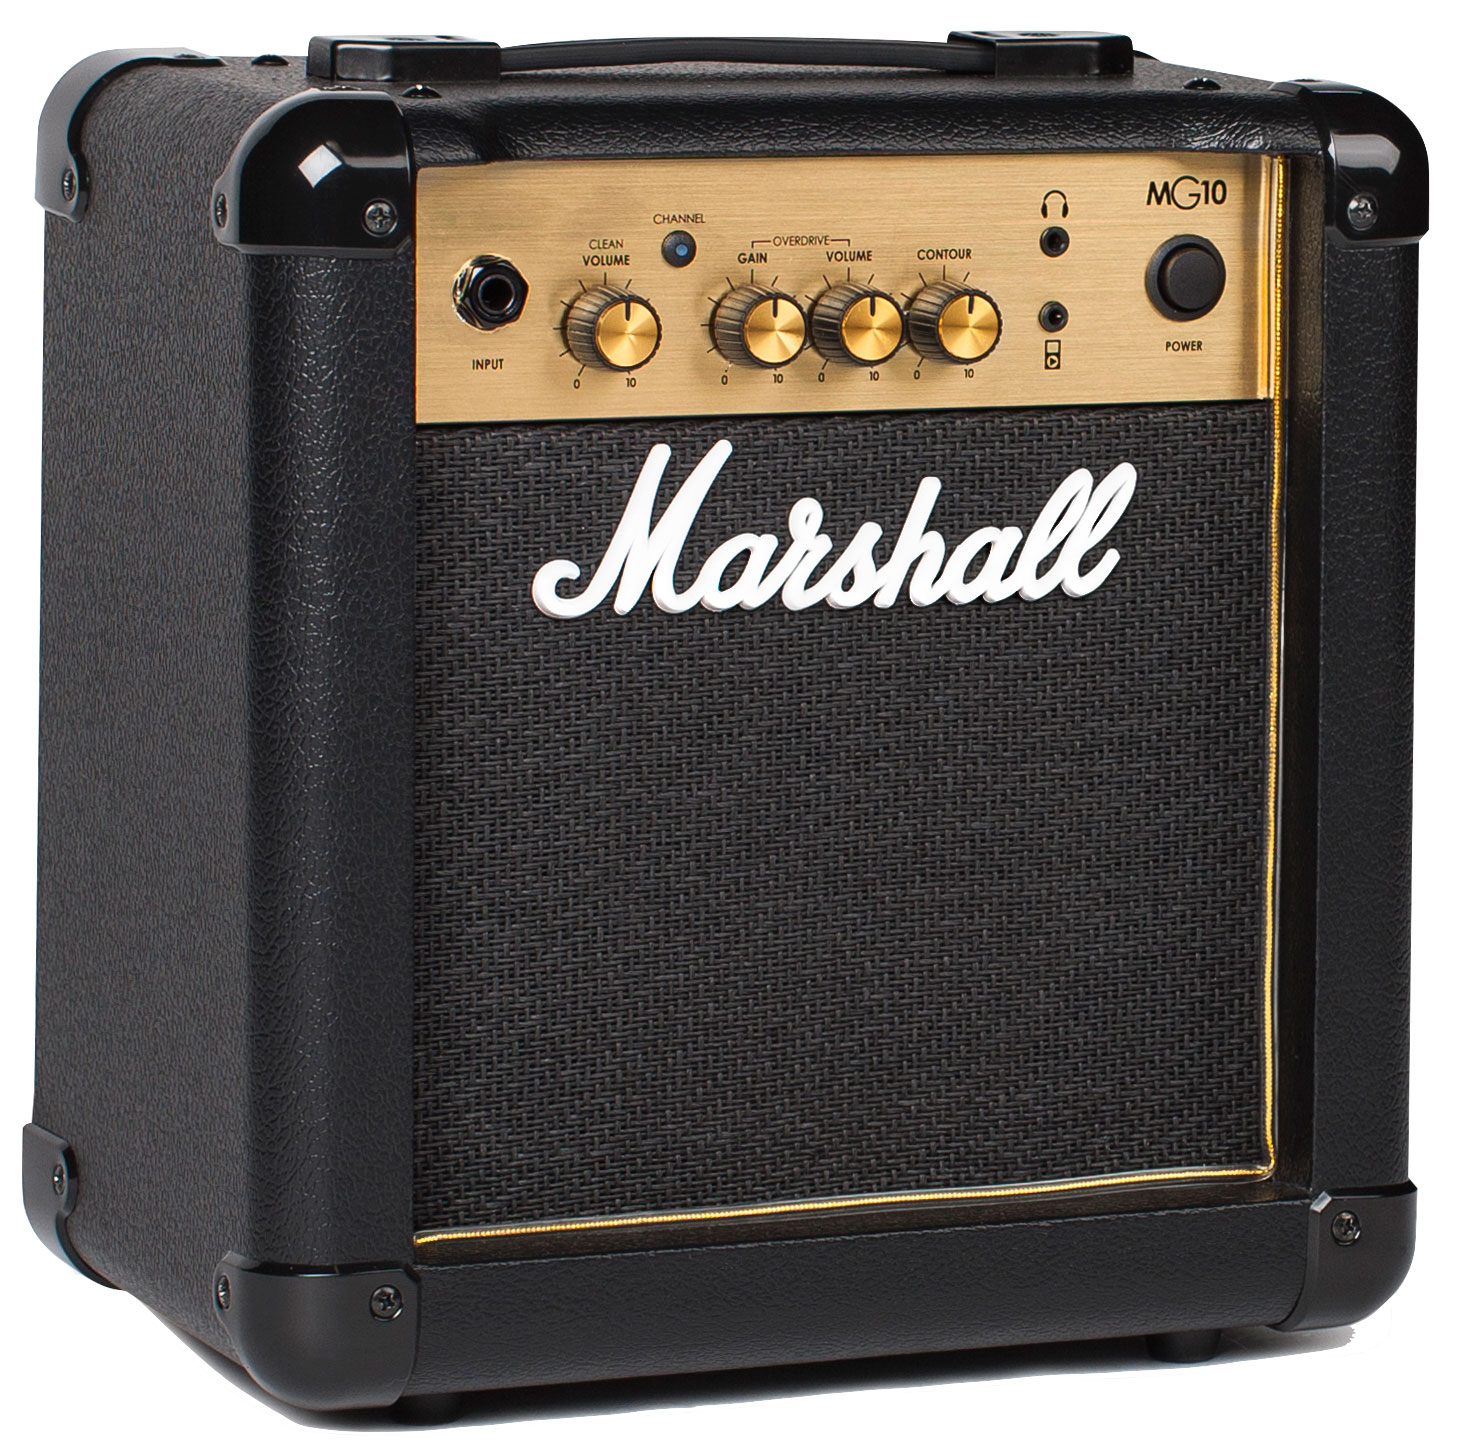 Eastone Tl70 +marshall Mg10g Combo 10 W +housse +courroie +cable +mediators - Olympic White - Packs guitarra eléctrica - Variation 6